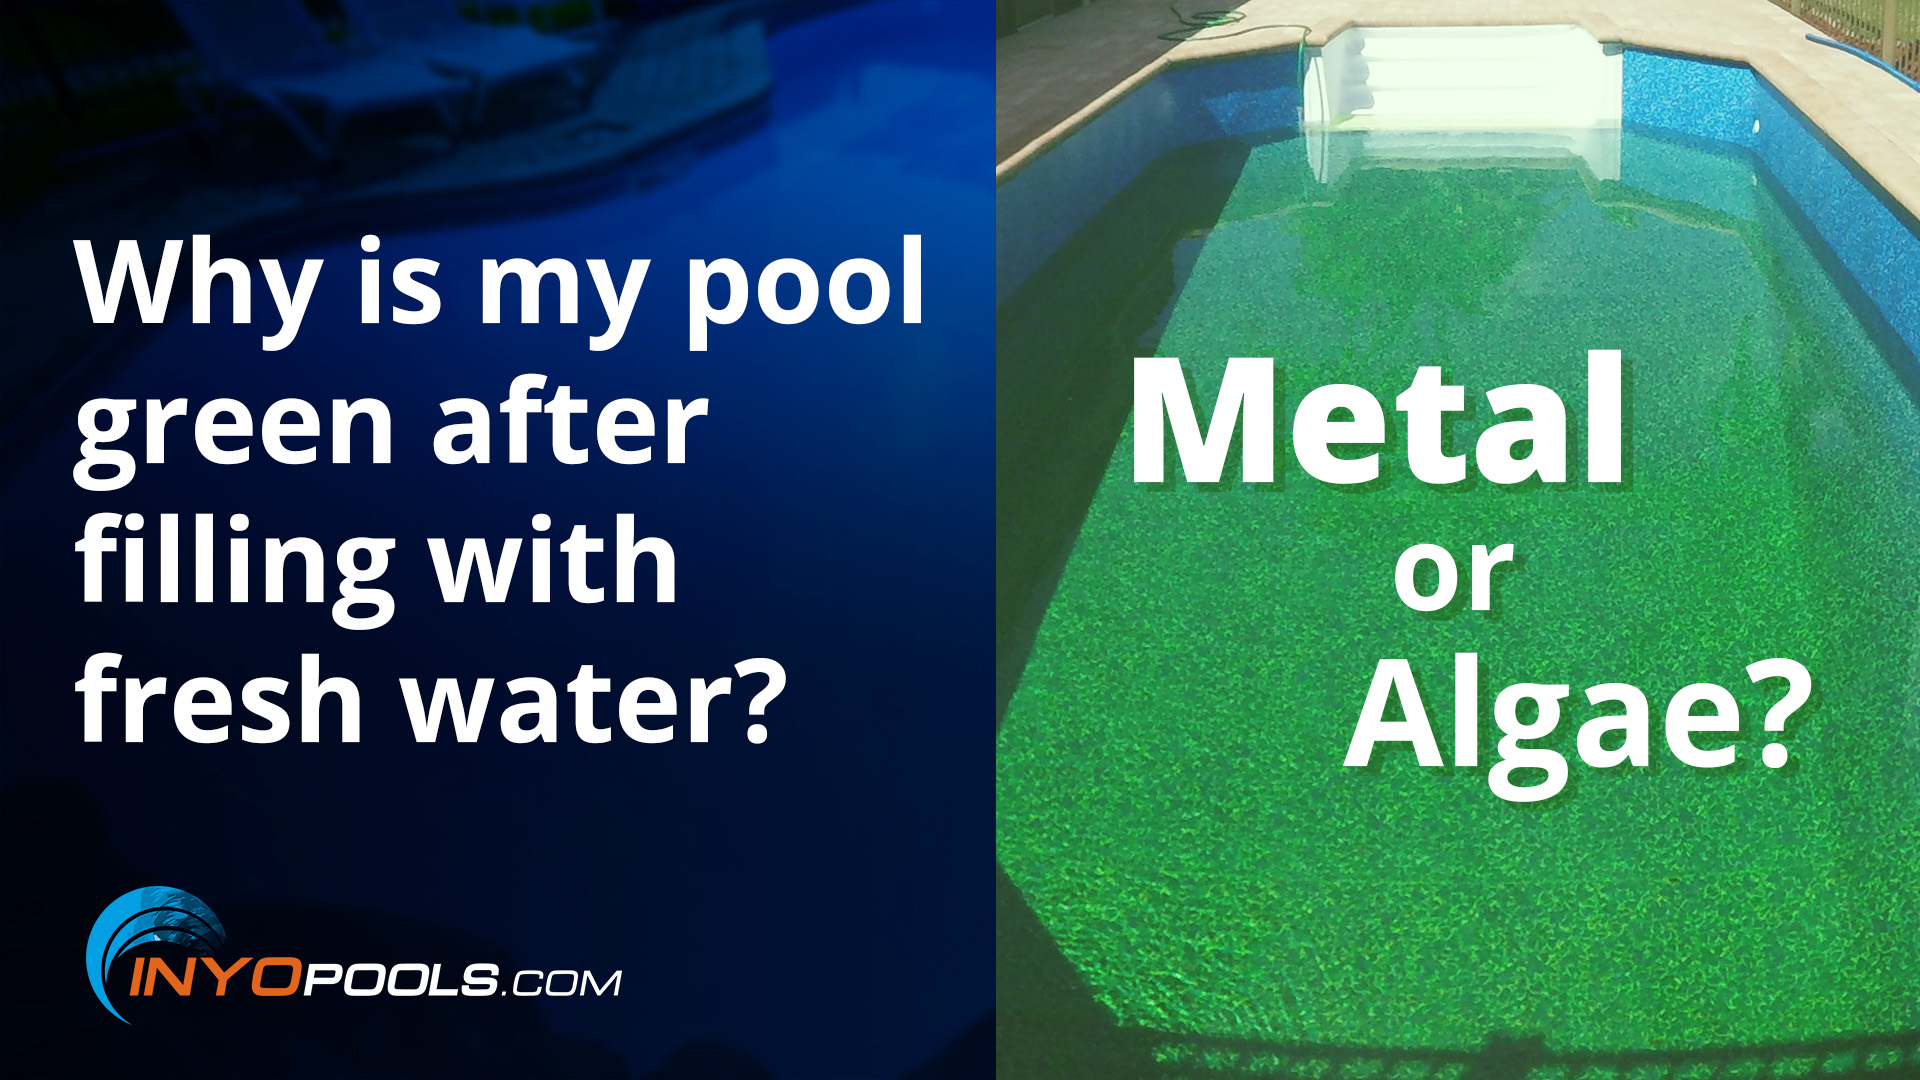 Why is my pool green after filling with fresh water?